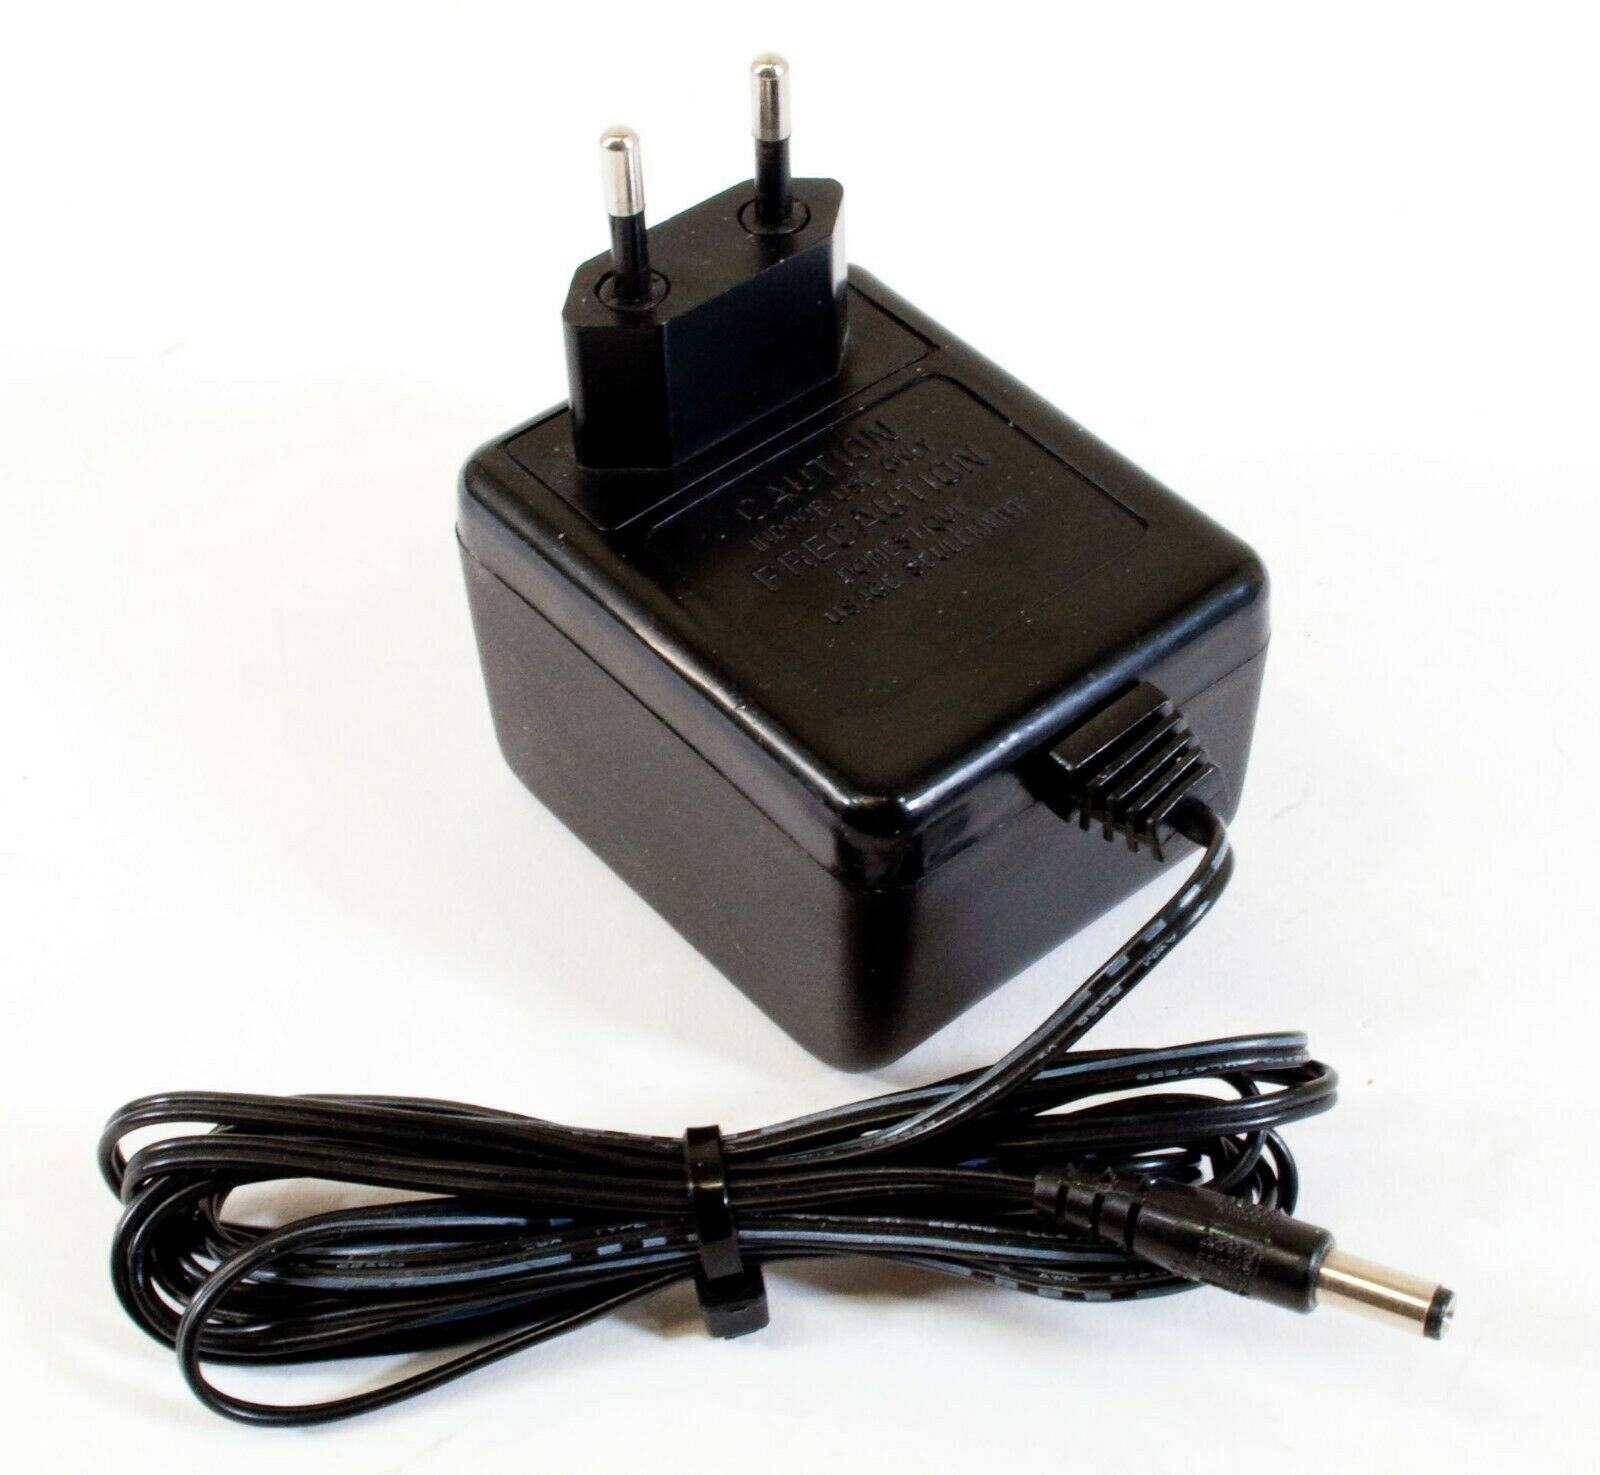 Anoma AD-0329F AC Adapter 9V 1A Original Charger Power Supply Europlug Output Current: 1 A MPN: AD-0329F Brand: Ano - Click Image to Close